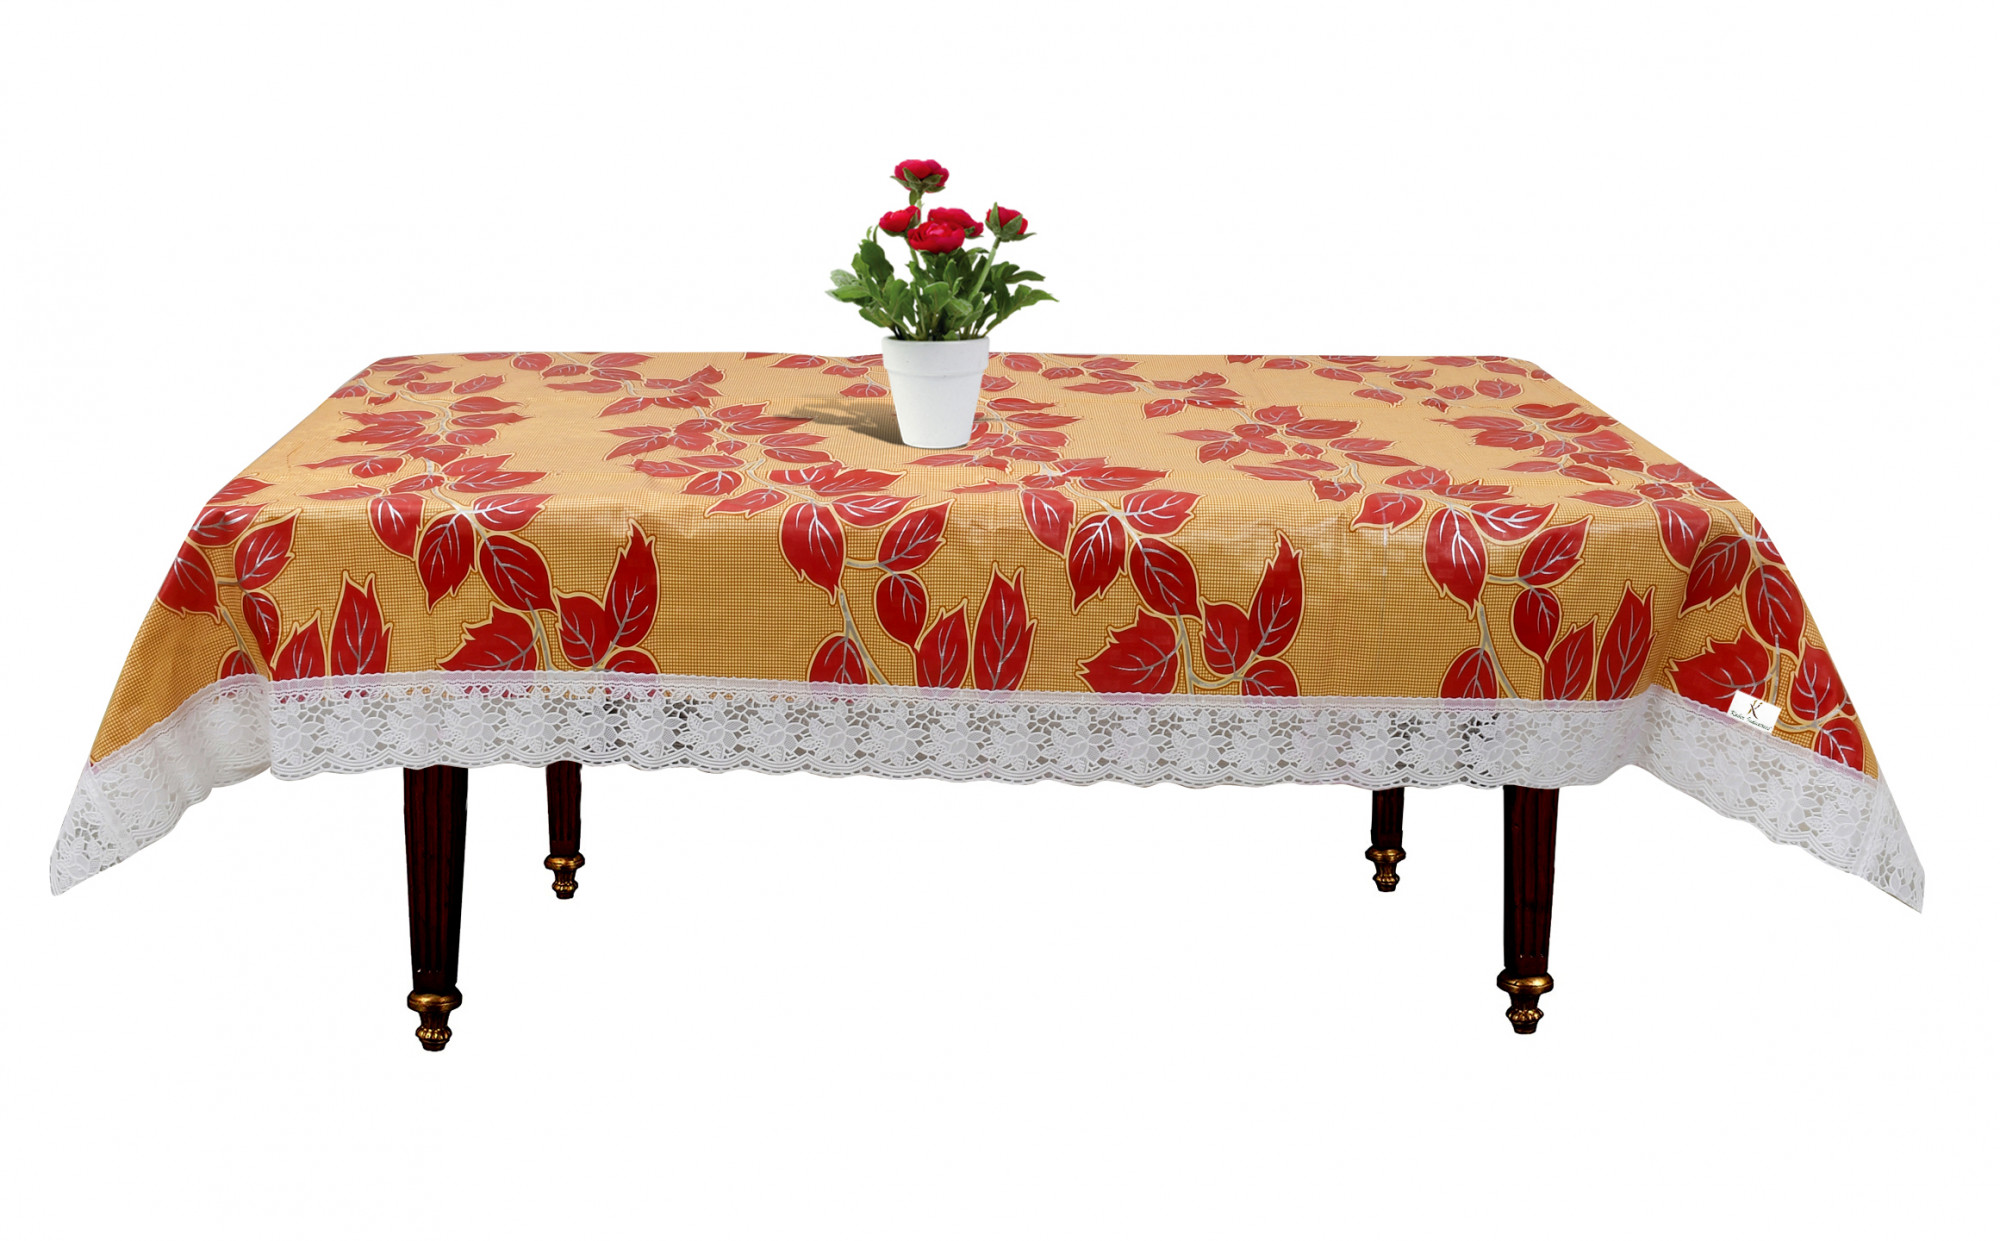 Kuber Industries Leaf Print PVC 4 Seater Center Table Cover 40